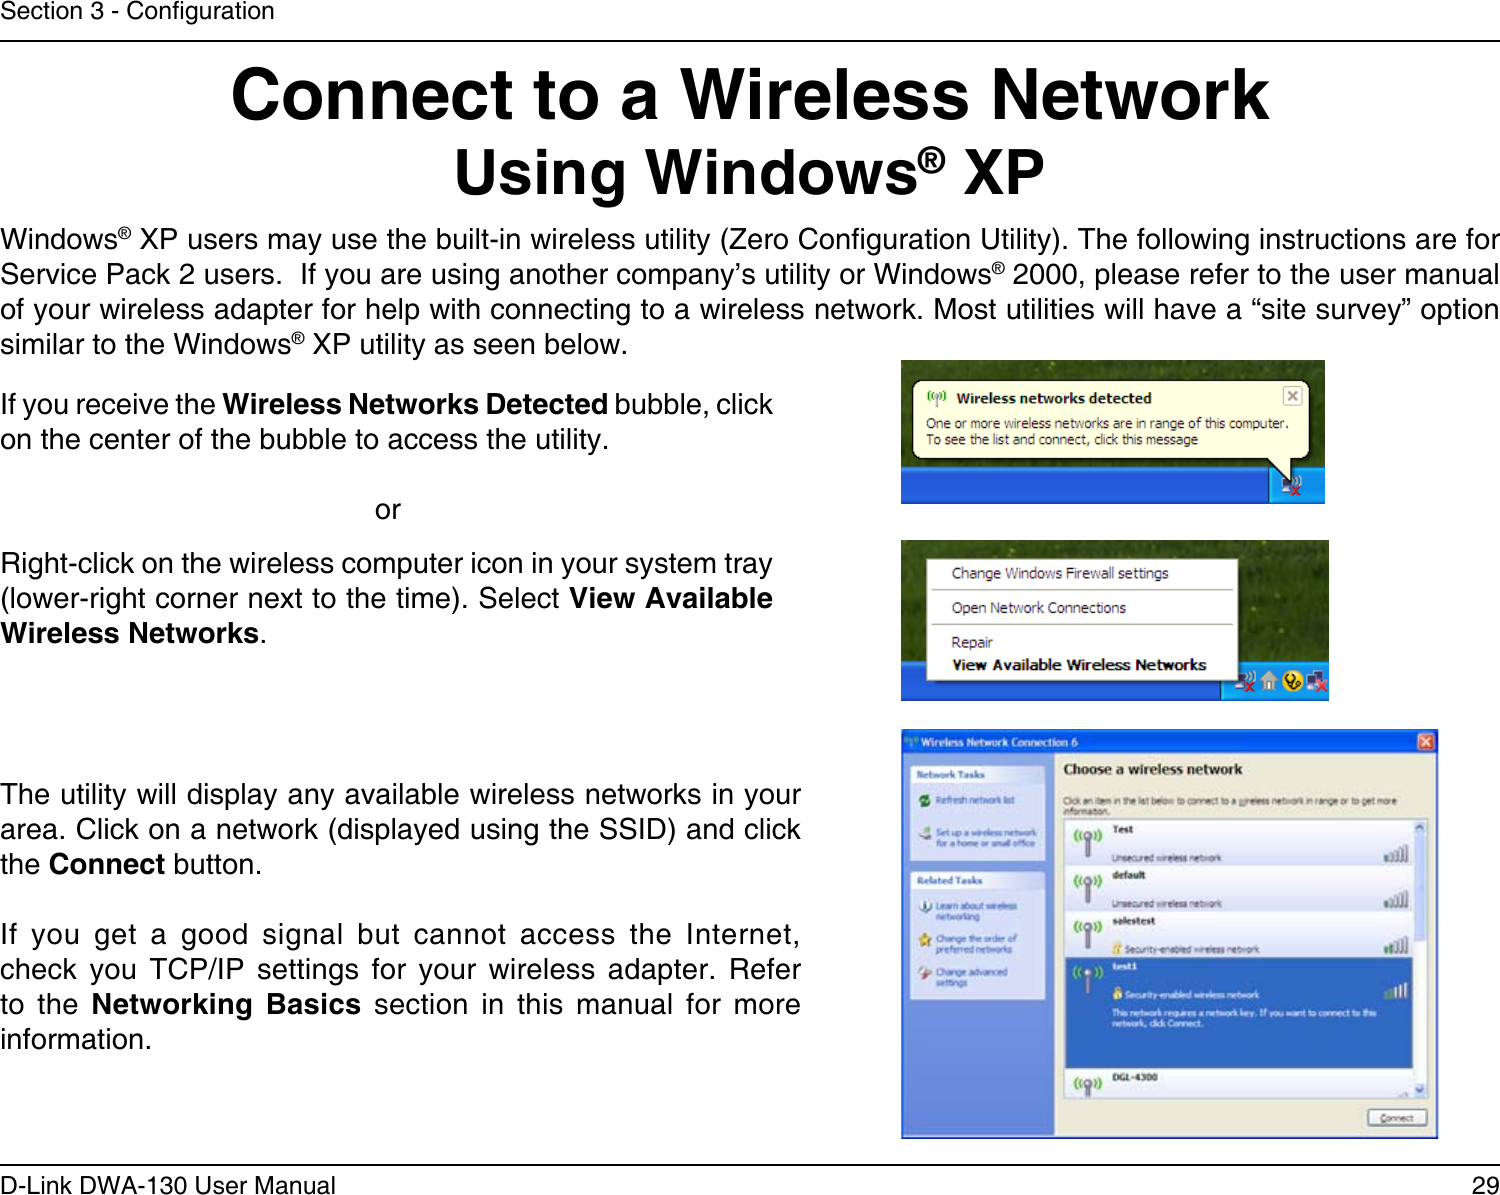 29D-Link DWA-130 User ManualSection 3 - CongurationConnect to a Wireless NetworkUsing Windows® XPWindows® XP users may use the built-in wireless utility (Zero Conguration Utility). The following instructions are for Service Pack 2 users.  If you are using another company’s utility or Windows® 2000, please refer to the user manual of your wireless adapter for help with connecting to a wireless network. Most utilities will have a “site survey” option similar to the Windows® XP utility as seen below.Right-click on the wireless computer icon in your system tray (lower-right corner next to the time). Select View Available Wireless Networks.If you receive the Wireless Networks Detected bubble, click on the center of the bubble to access the utility.     orThe utility will display any available wireless networks in your area. Click on a network (displayed using the SSID) and click the Connect button.If  you  get  a  good  signal  but  cannot  access  the  Internet, check  you  TCP/IP  settings  for  your  wireless  adapter.  Refer to  the  Networking  Basics  section  in  this  manual  for  more information.